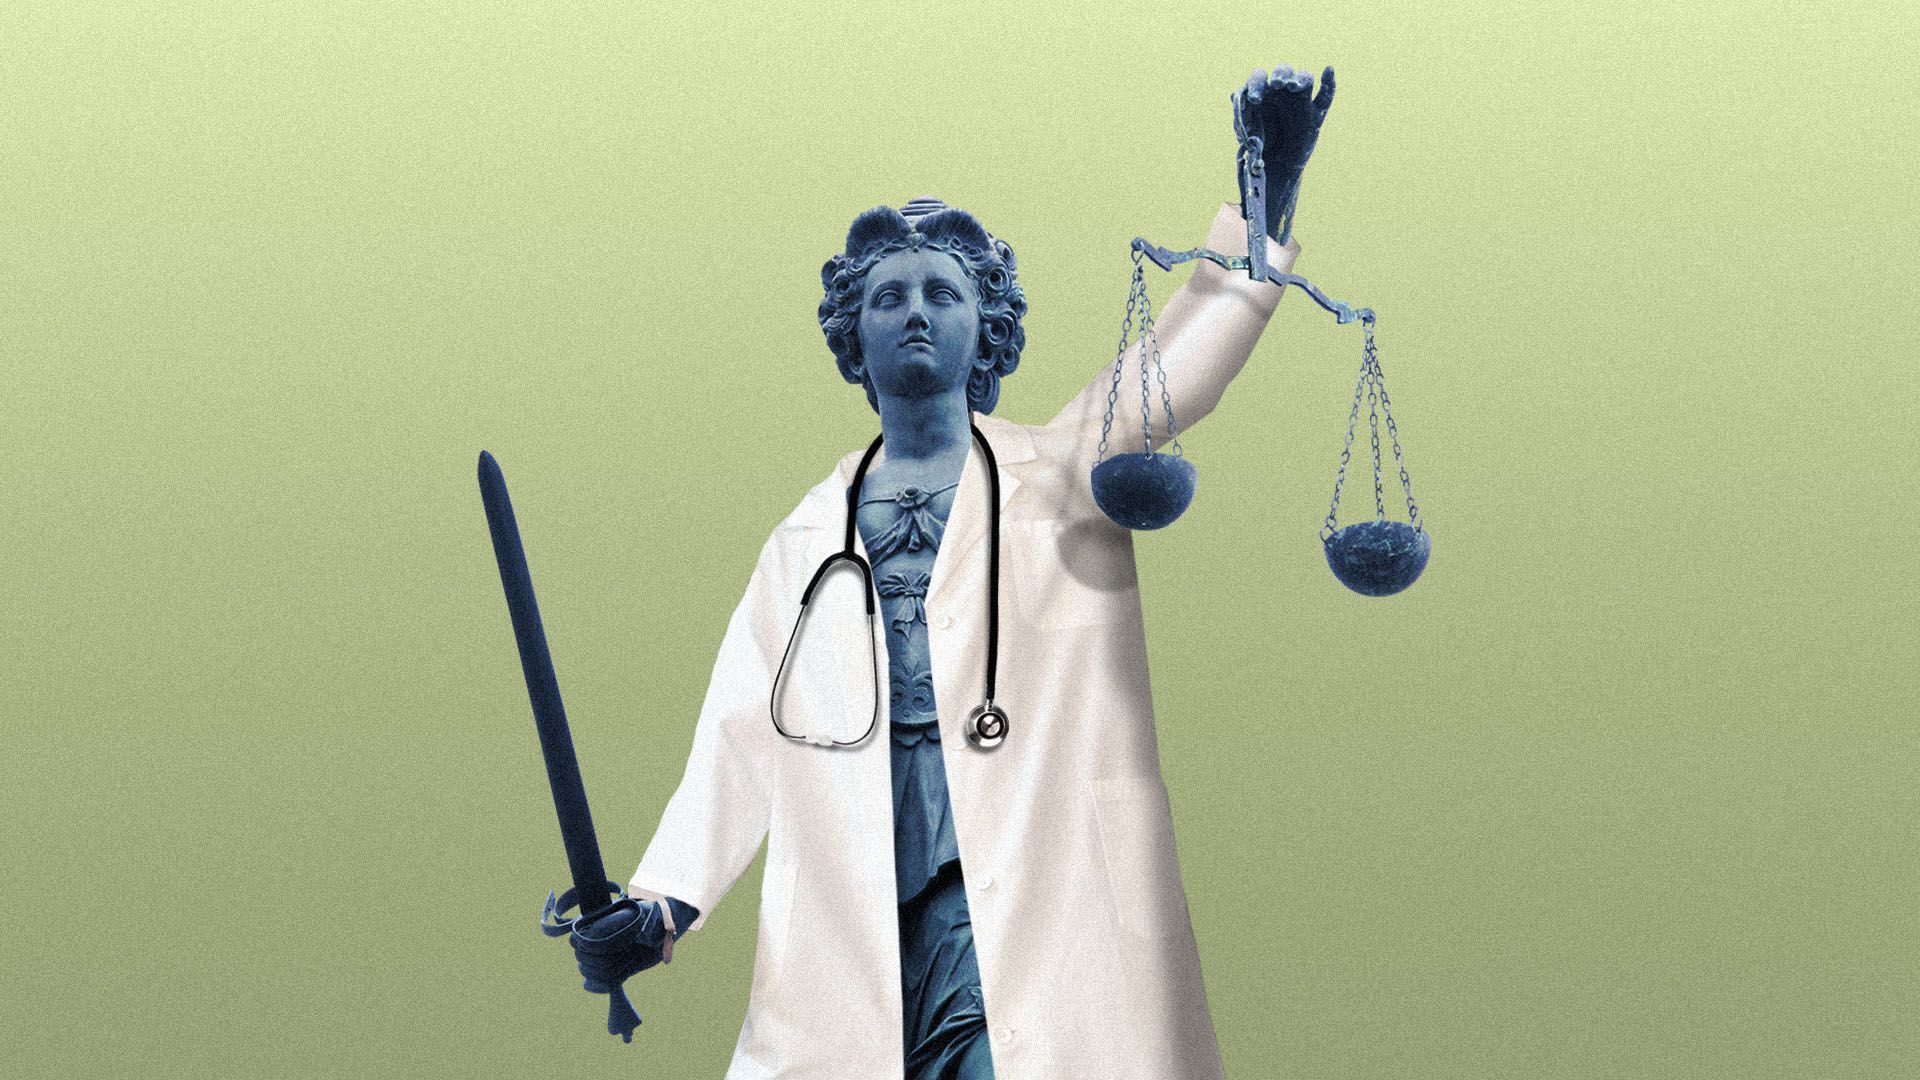 Illustration of a statue of Justice wearing a doctor's coat and a stethoscope